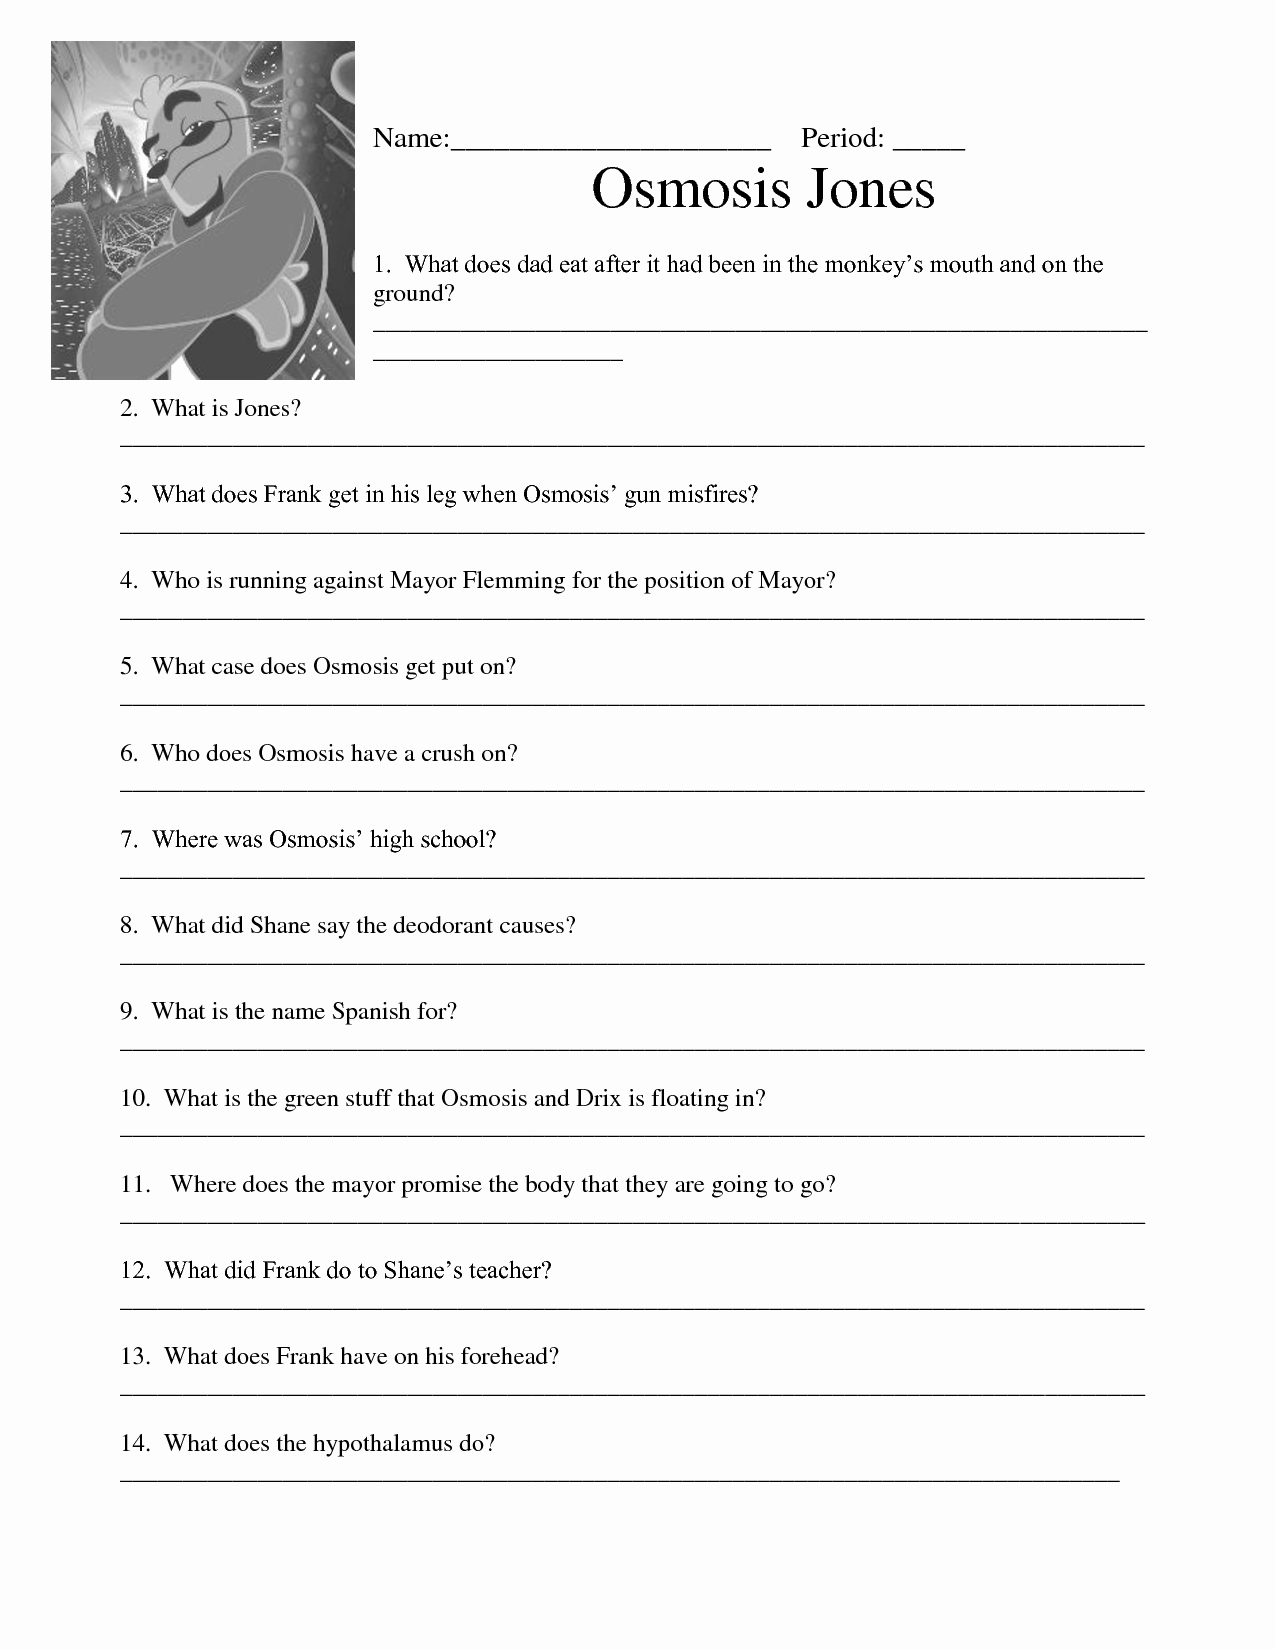 Osmosis Jones Worksheet Answer Key Awesome 48 tonicity and Osmosis Worksheet 85 Nacl Record the